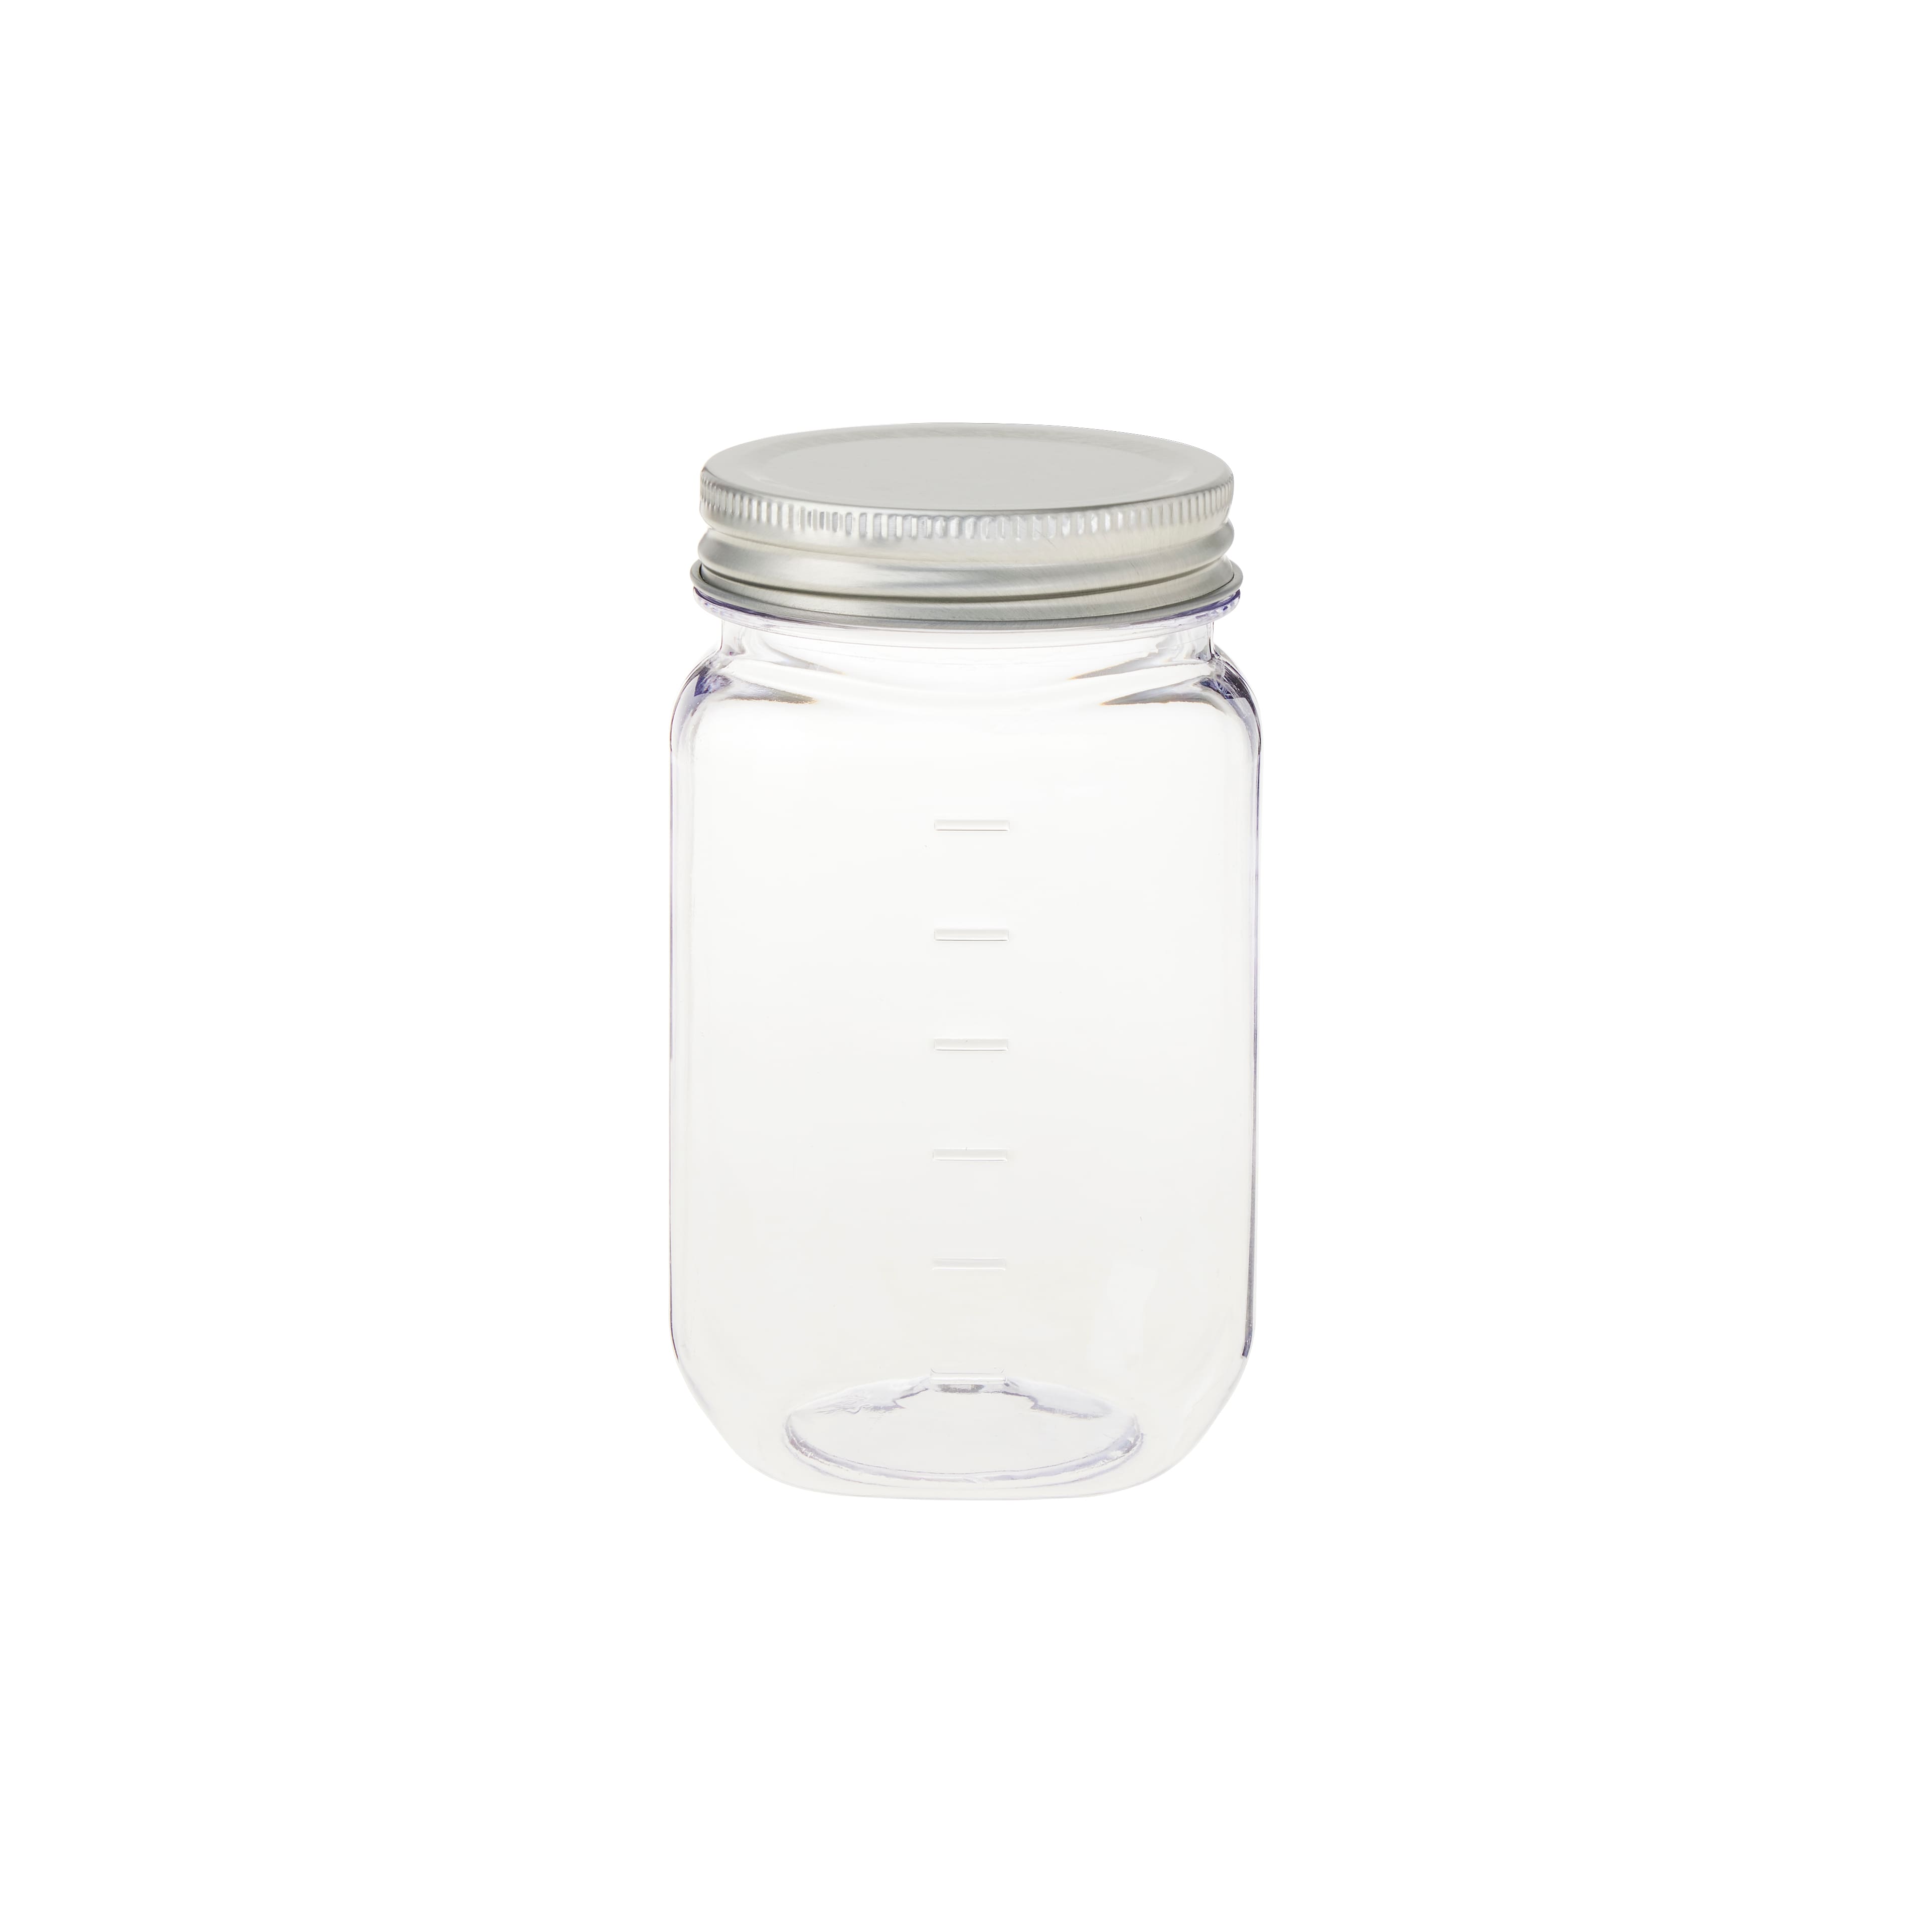 24ea - 5 Oz Round Glass Jar With Lid by Paper Mart